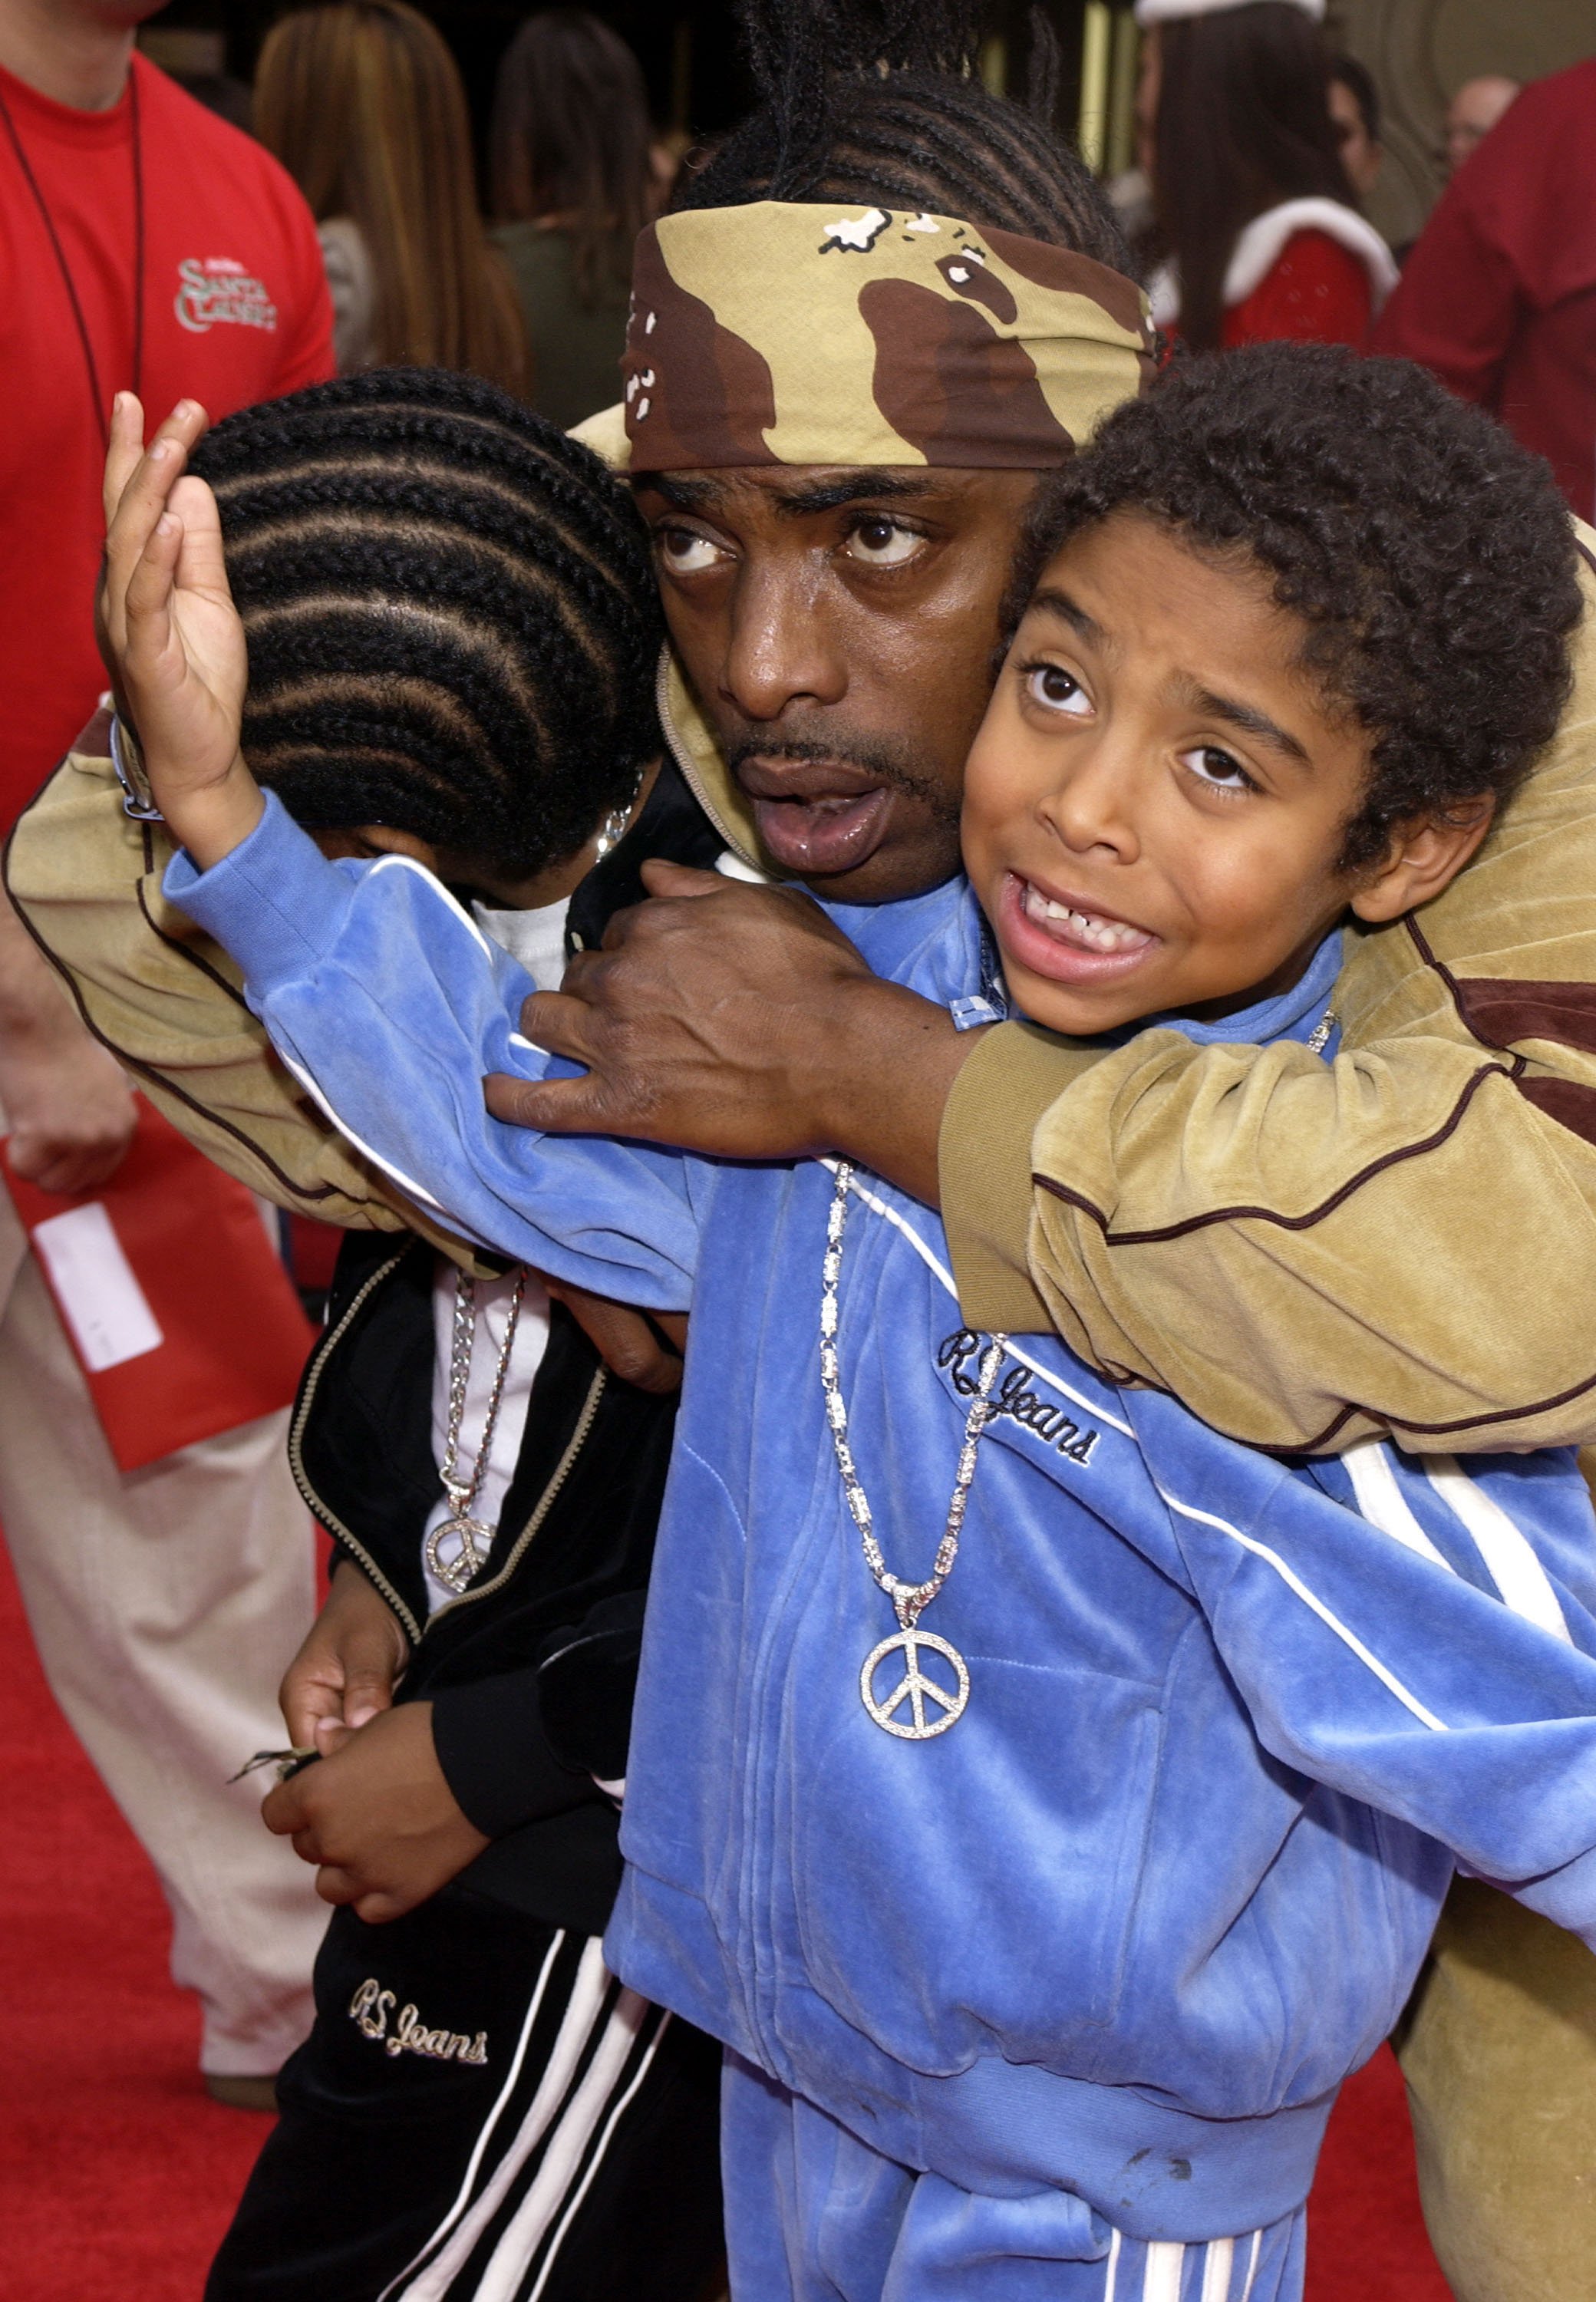 Coolio and his sons at the premiere of "The Santa Clause 2" in California on October 26, 2002 | Source: Getty Images